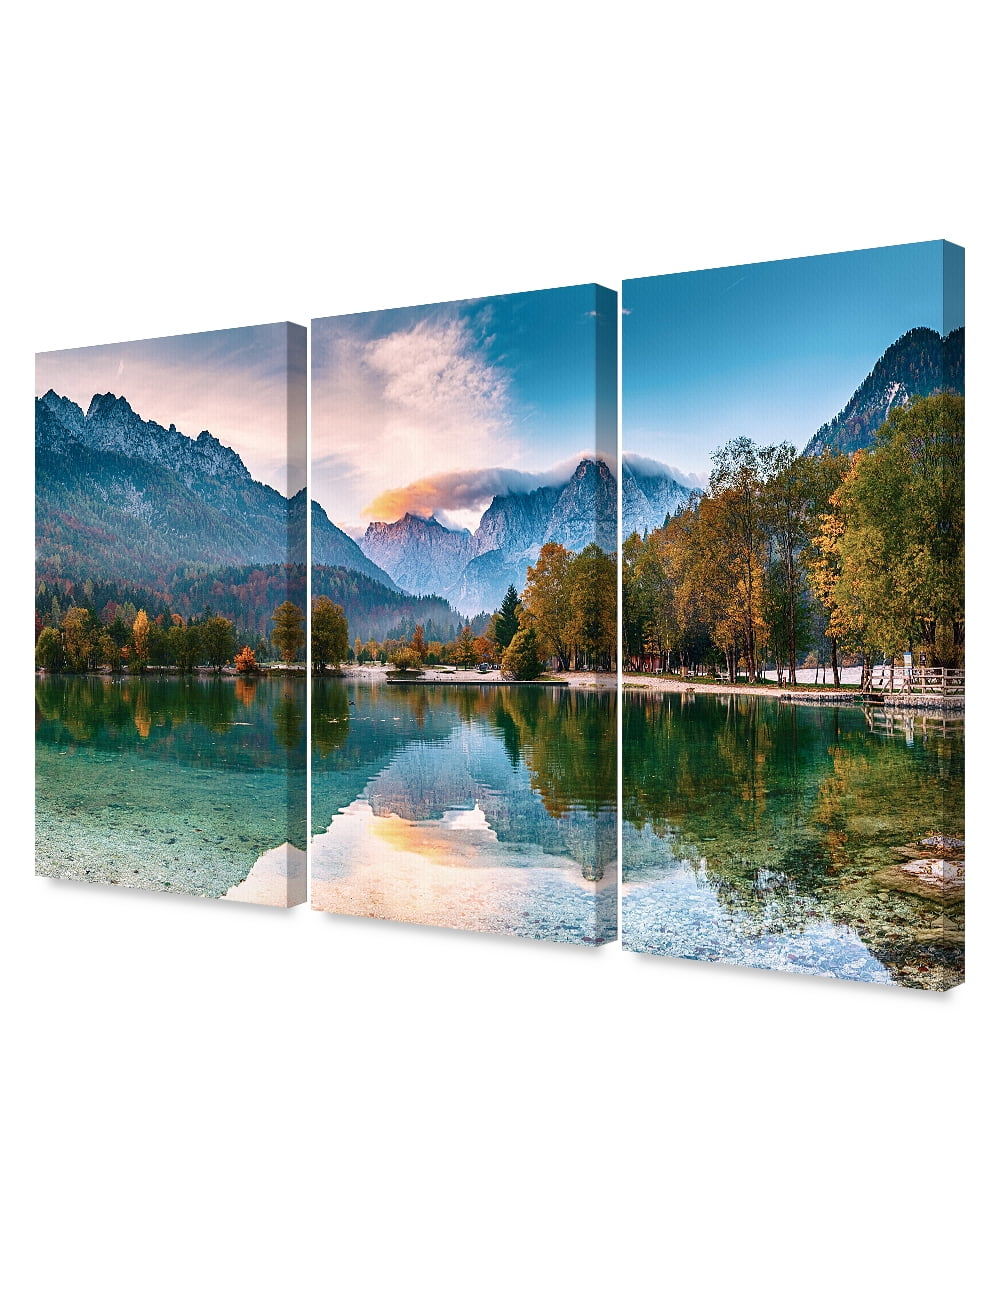 DecorArts Jasna lakes scenery(Triptych). Giclee Canvas  Prints for Wall Decor.48x32